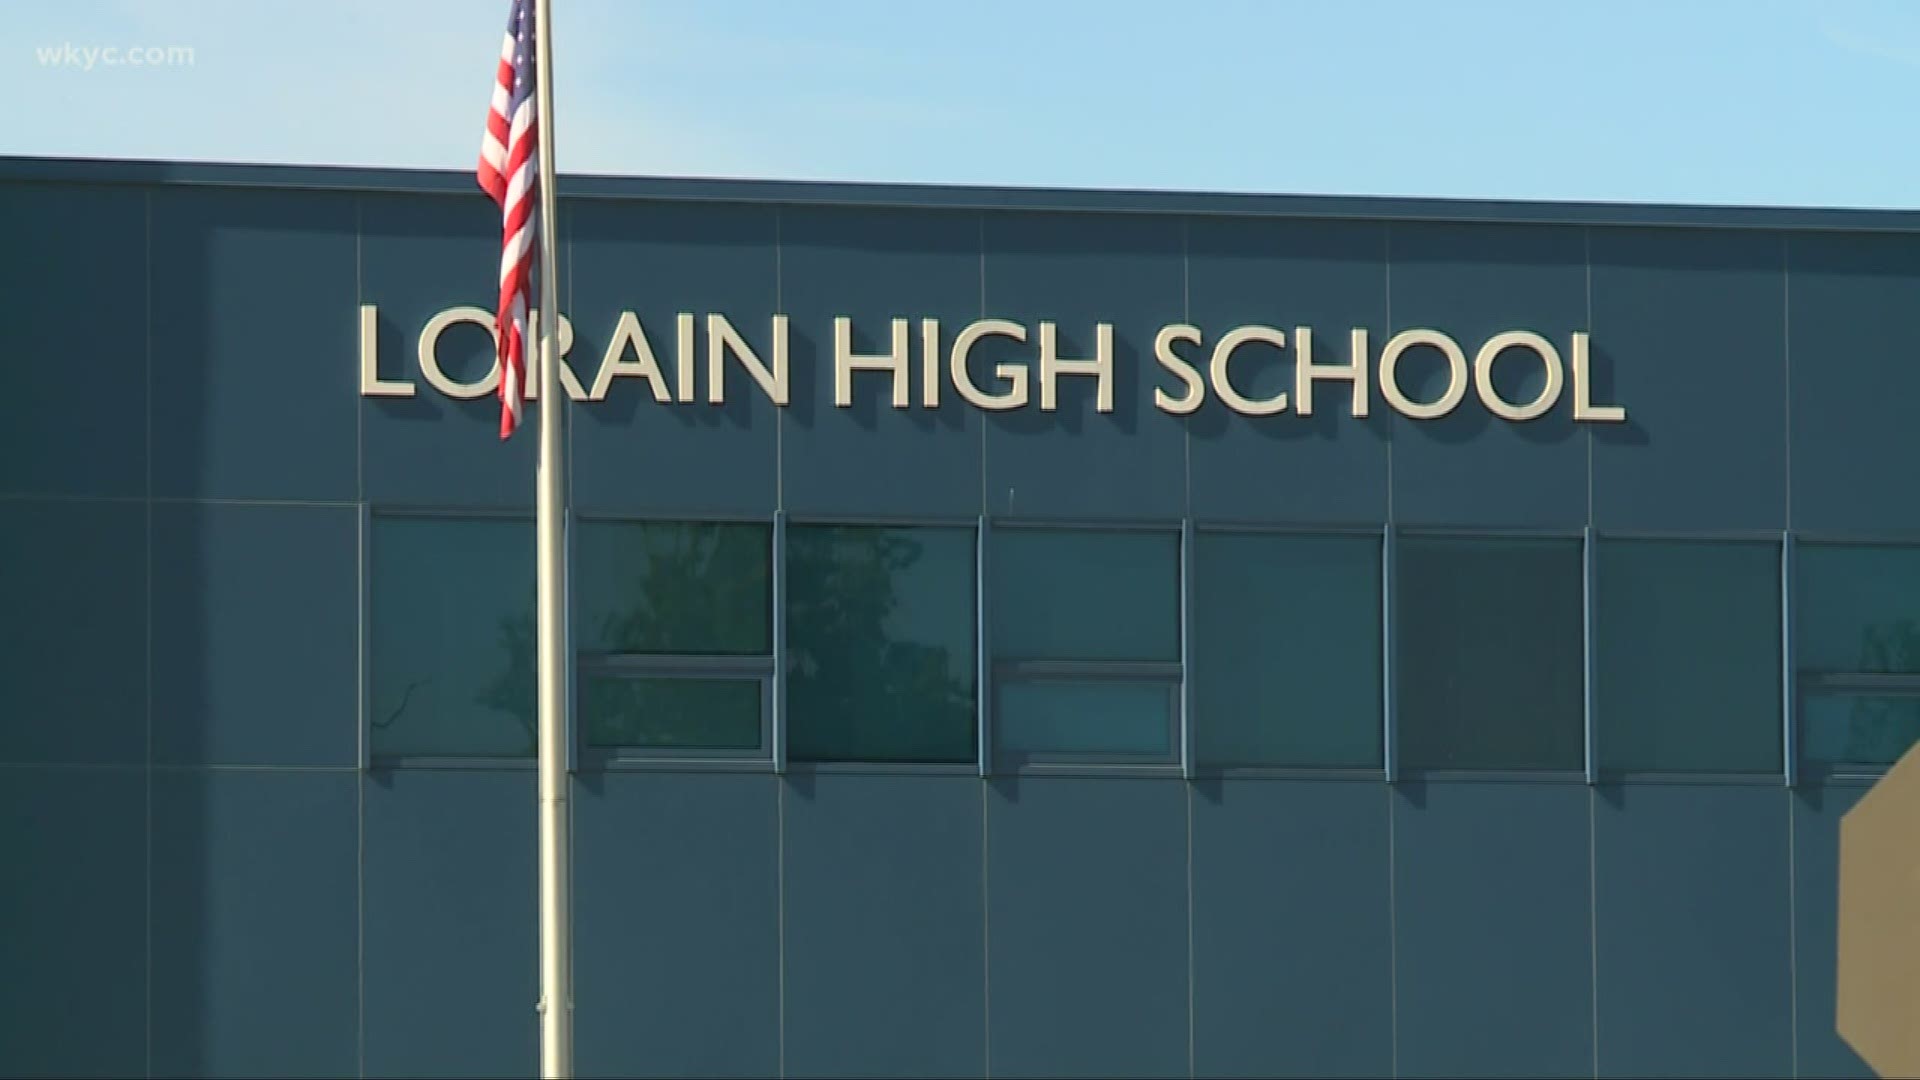 Lorain High School was on a Level 2 lockdown, meaning there was a potential threat outside the building. All doors and windows were locked.